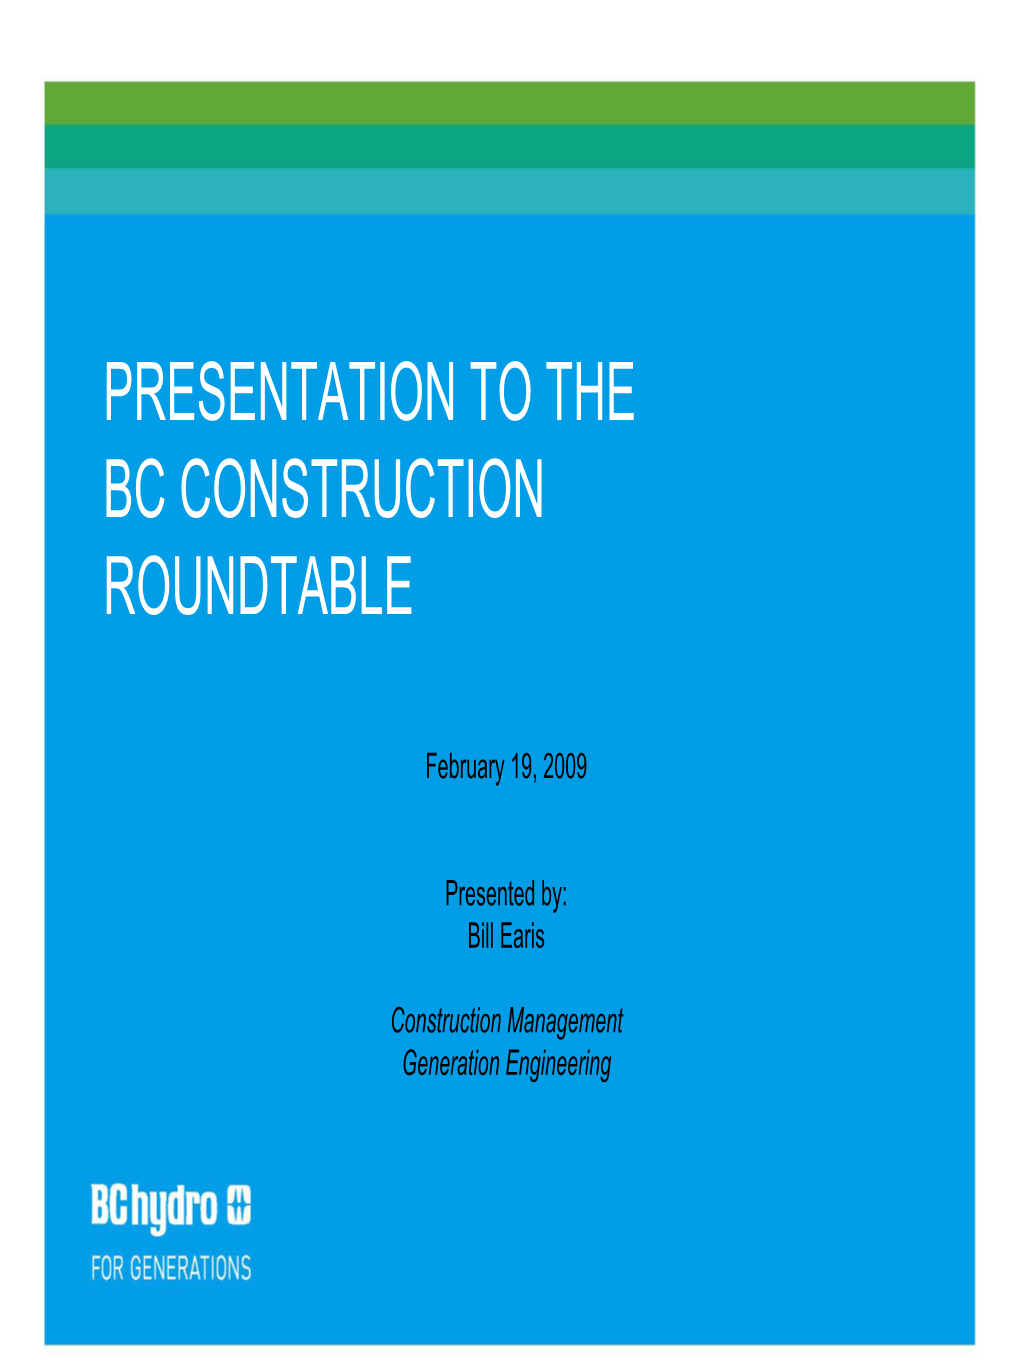 Presentation to the Bc Construction Roundtable